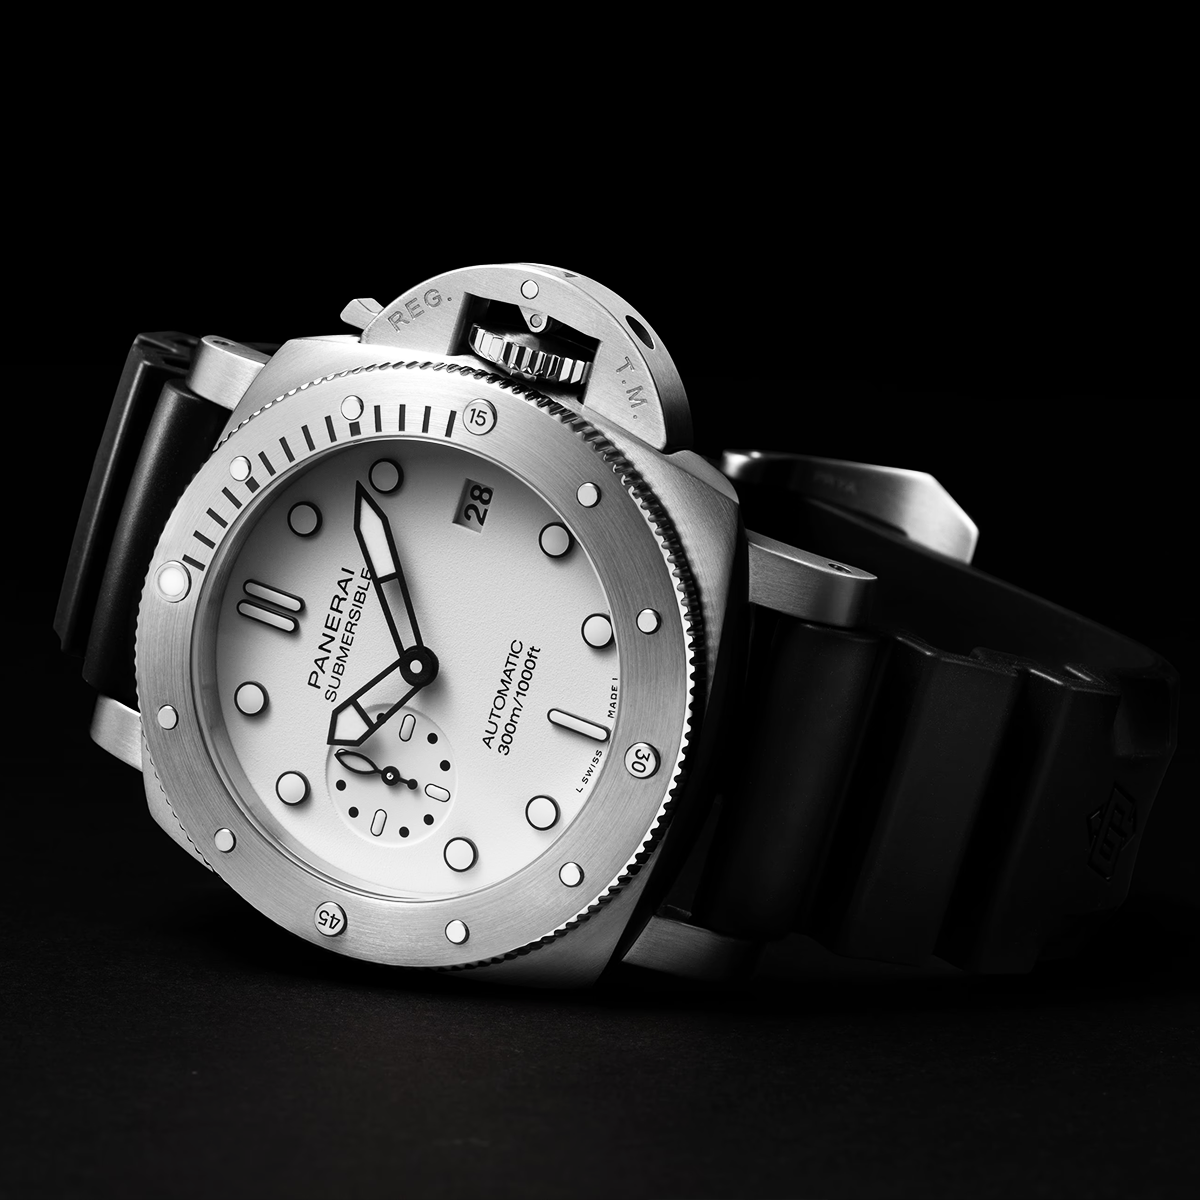 Submersible Bianco 42mm White Dial Automatic Strap Watch